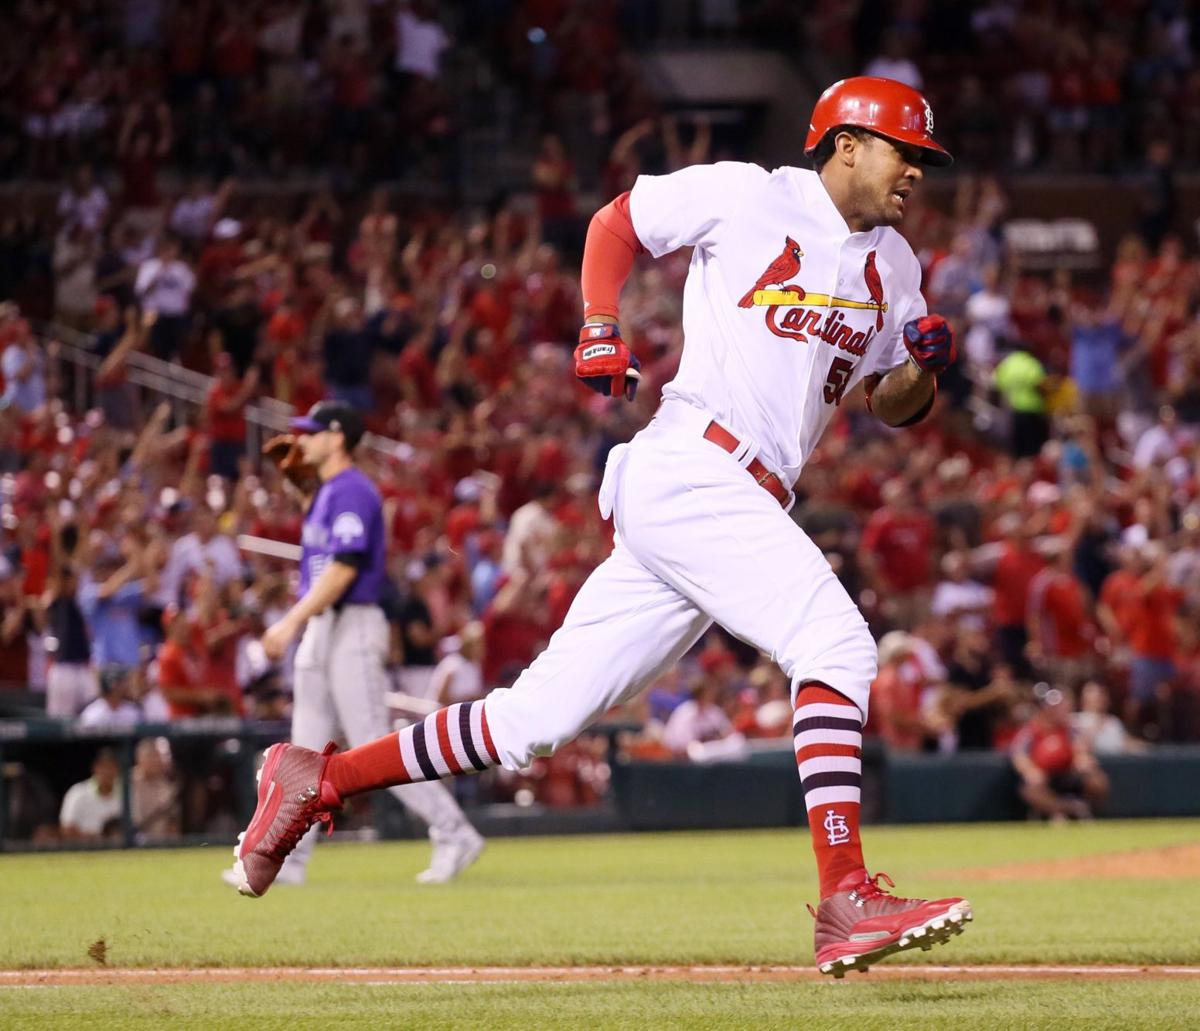 Cards beat Rockies 82 in first home game after break St. Louis